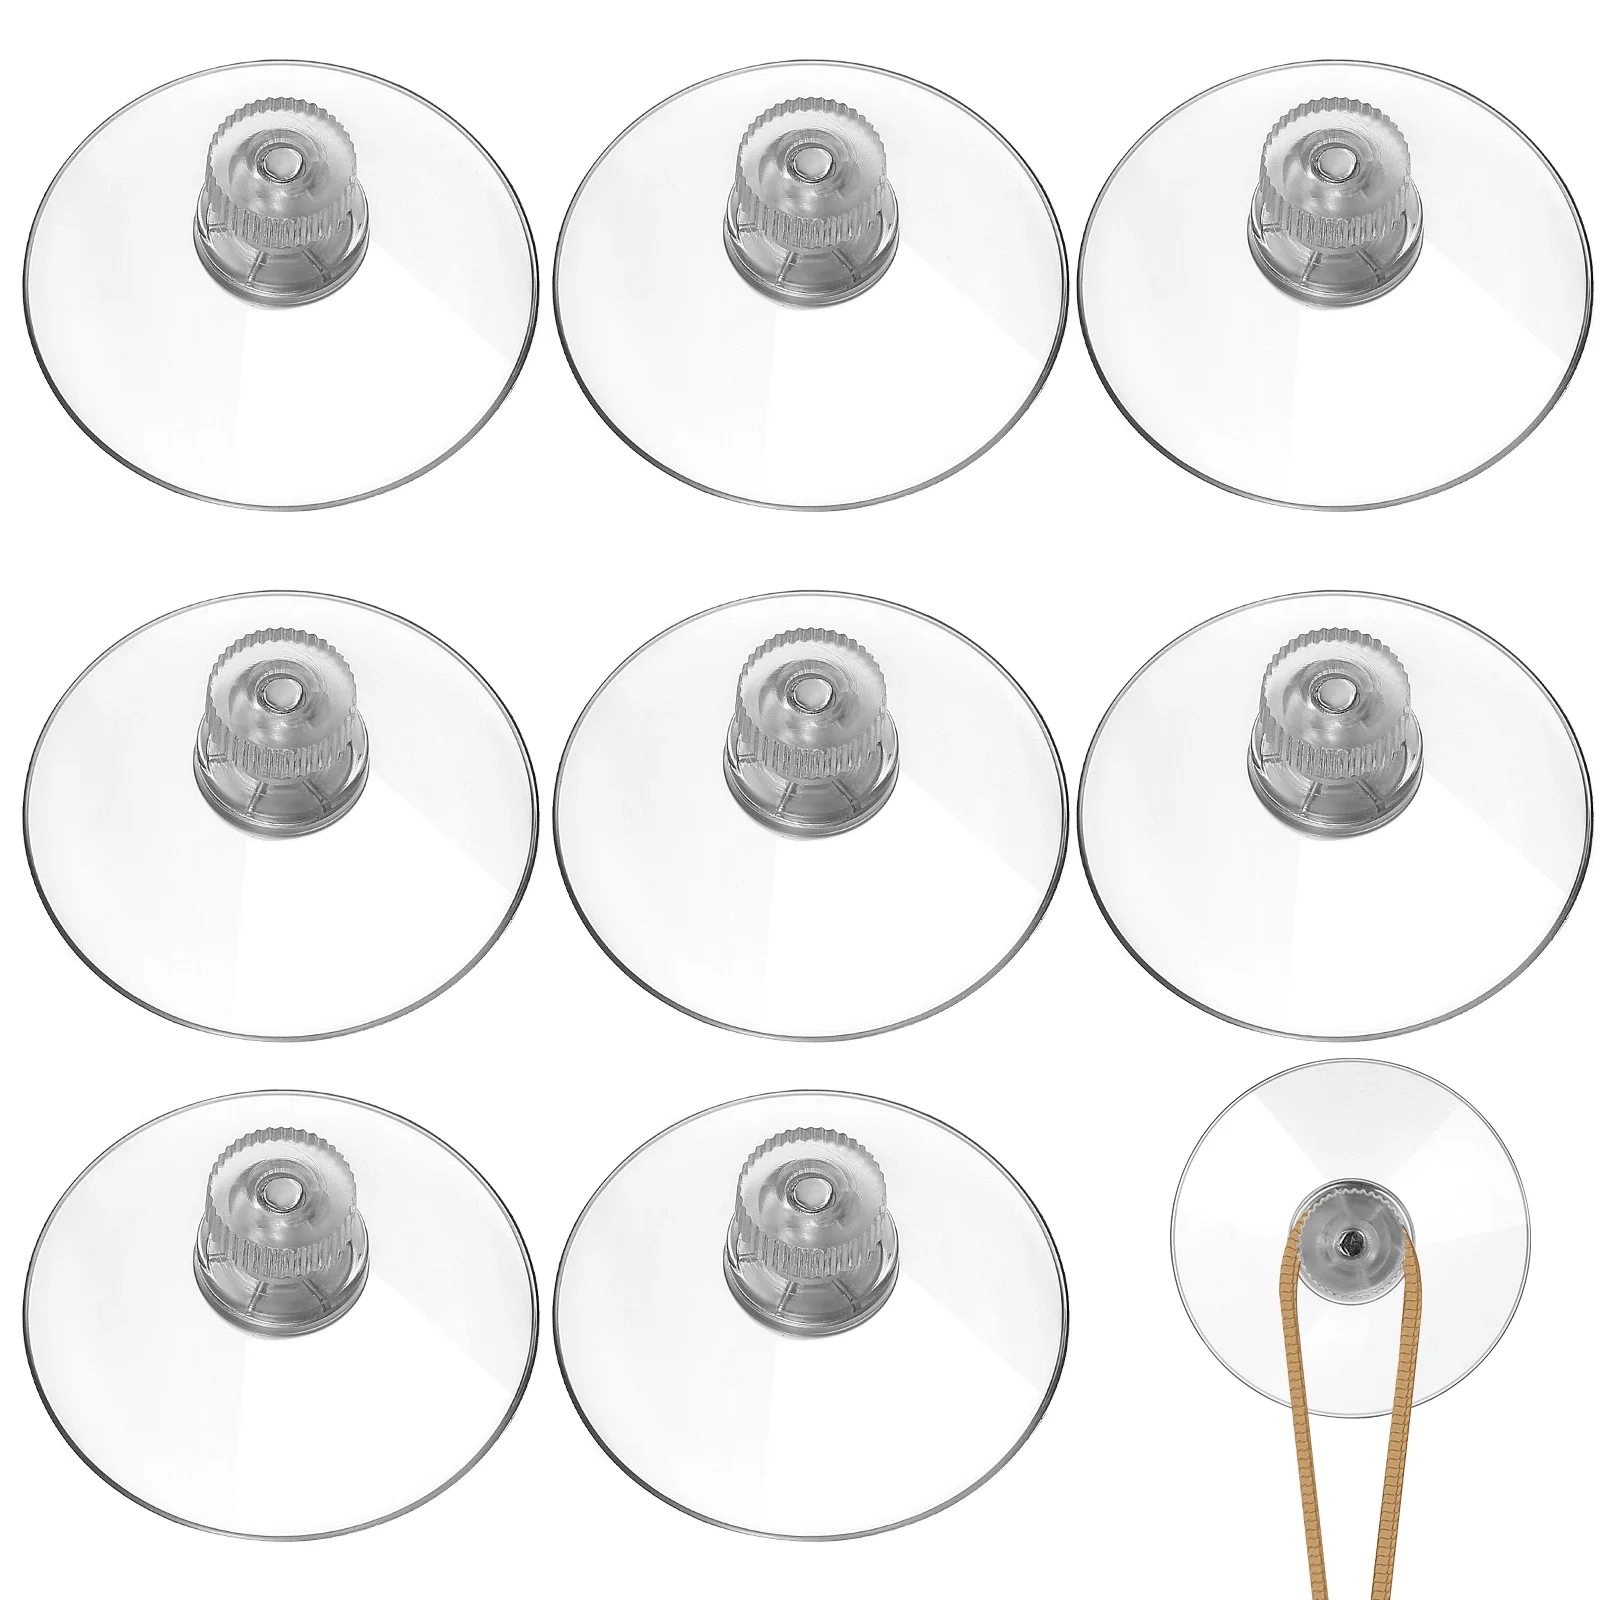 

8pcs Suction Cups Clear Suction Pads Sucker Holders for Window Bathroom Wall Car Shade